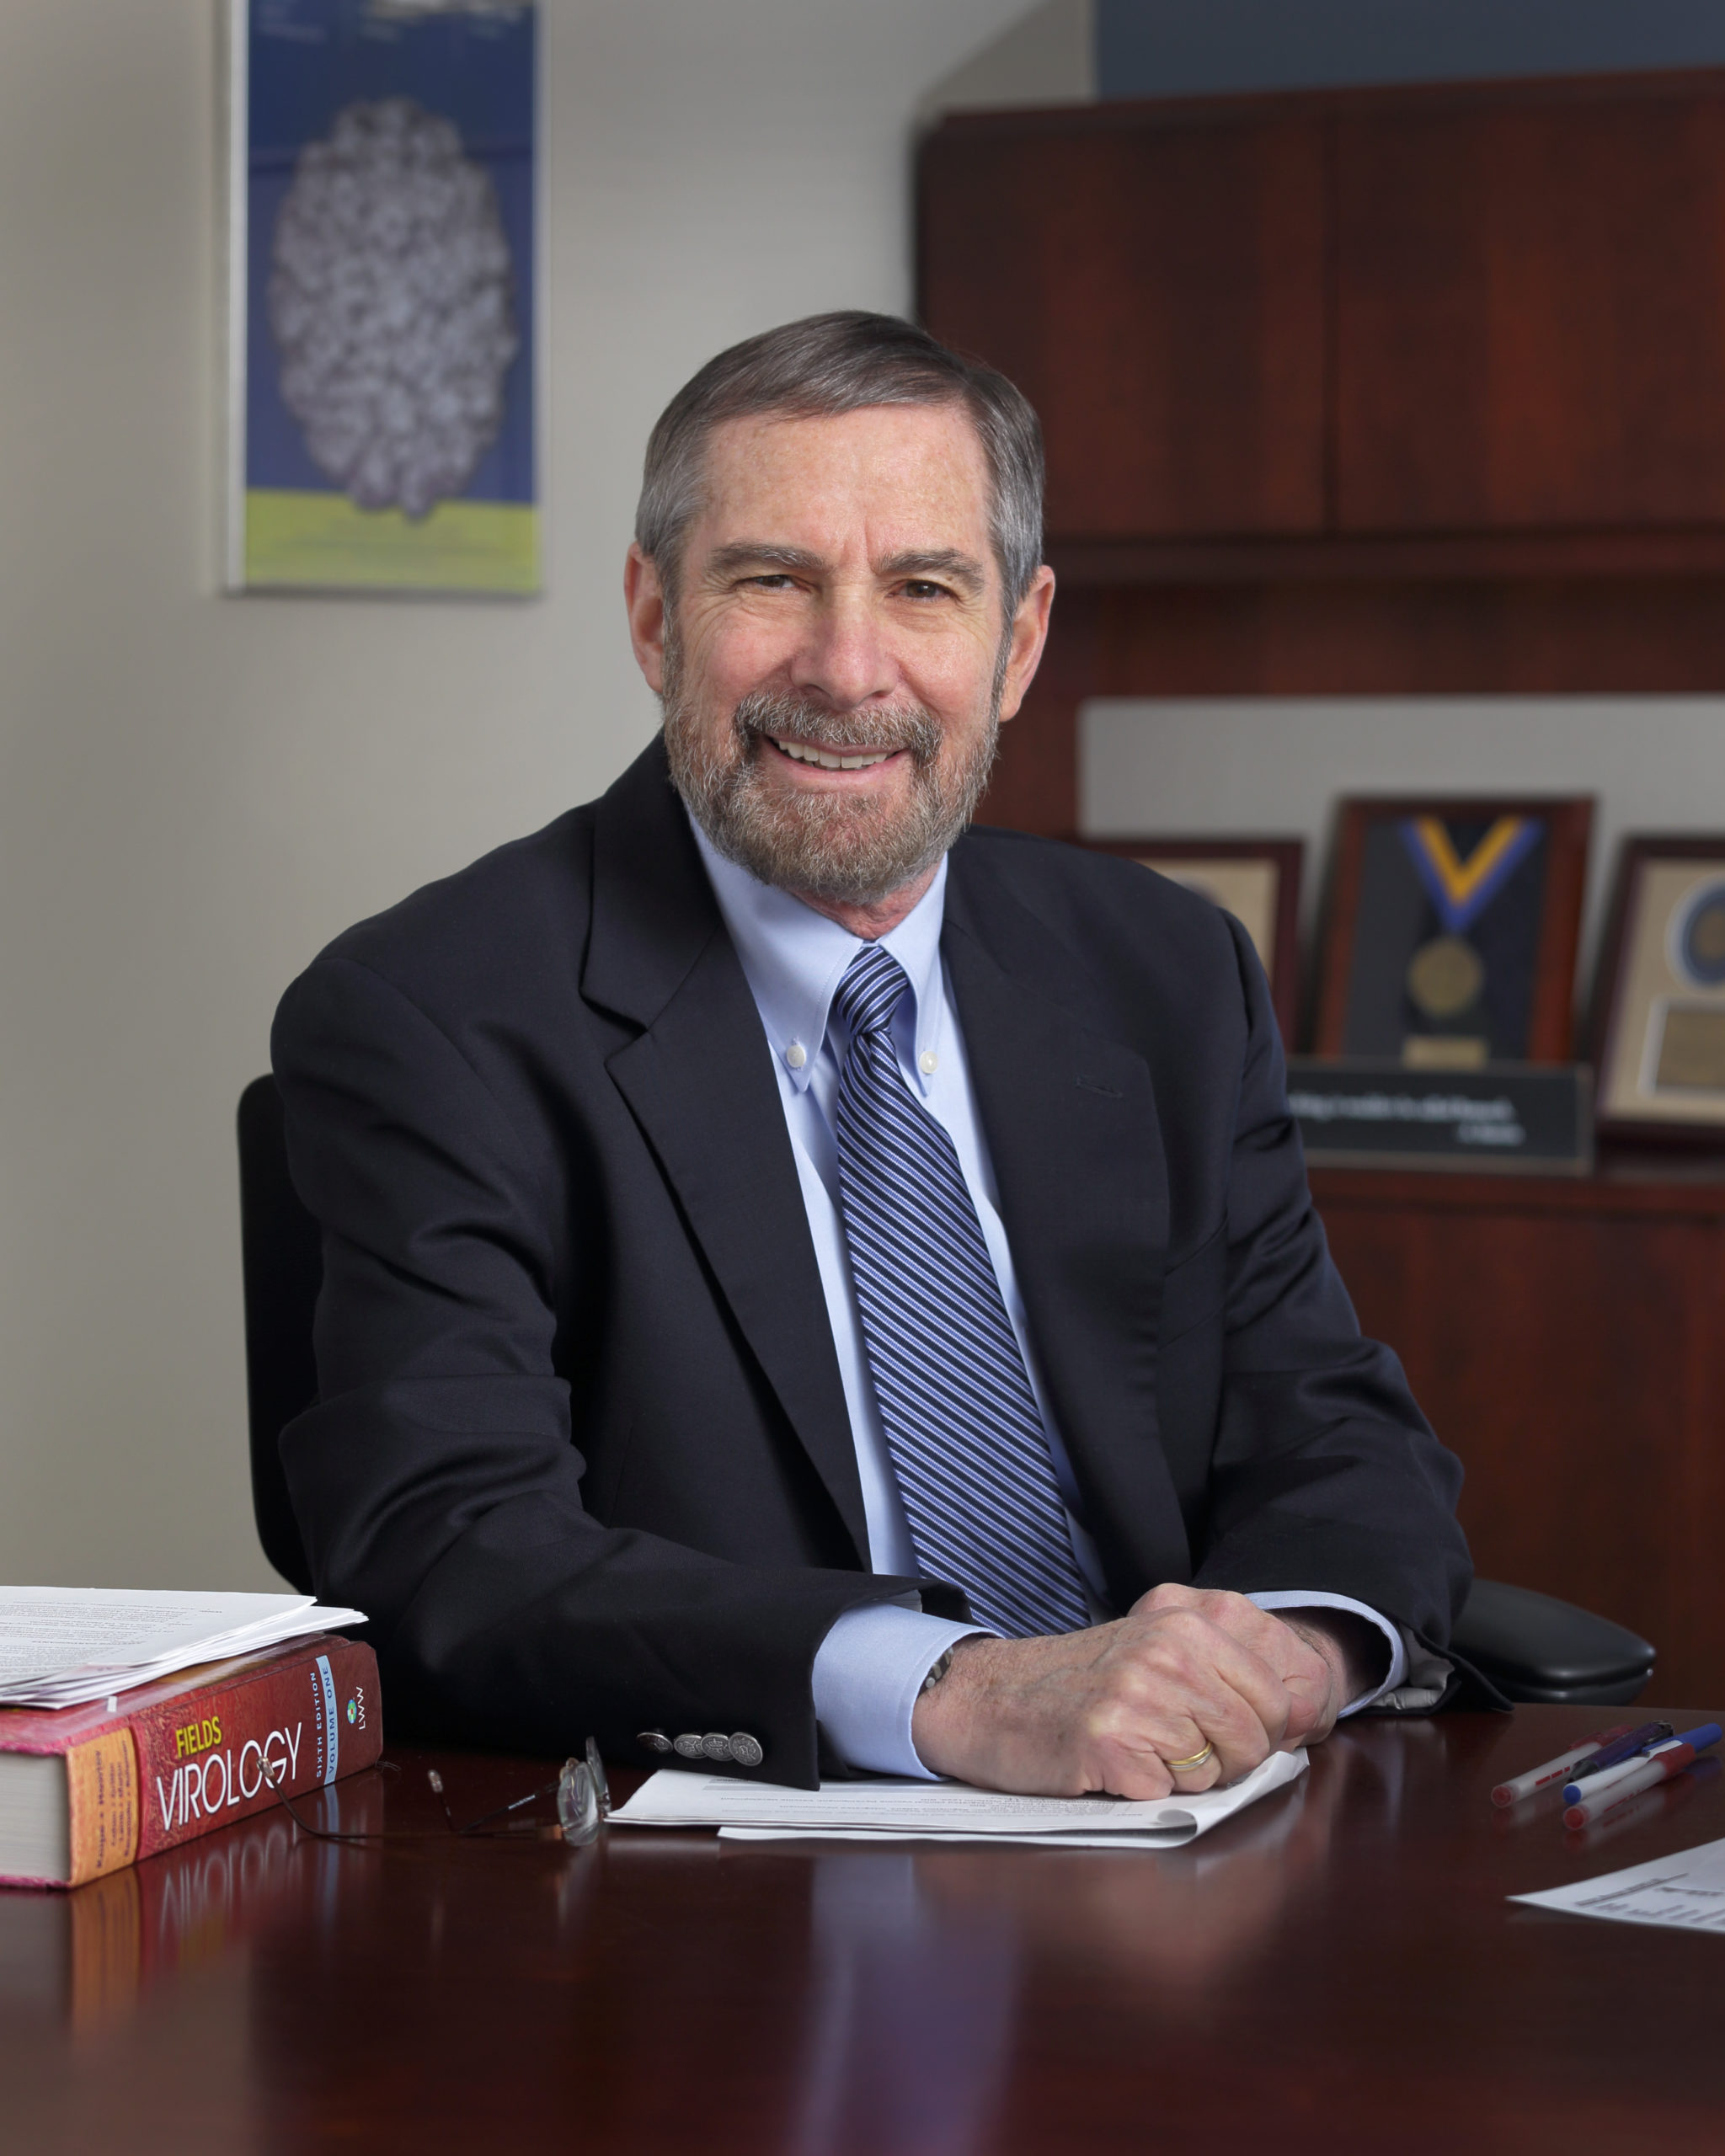 NCI Acting Director Dr. Douglas R. Lowy Shares a Special Message to Commemorate National Cancer Survivors Day®